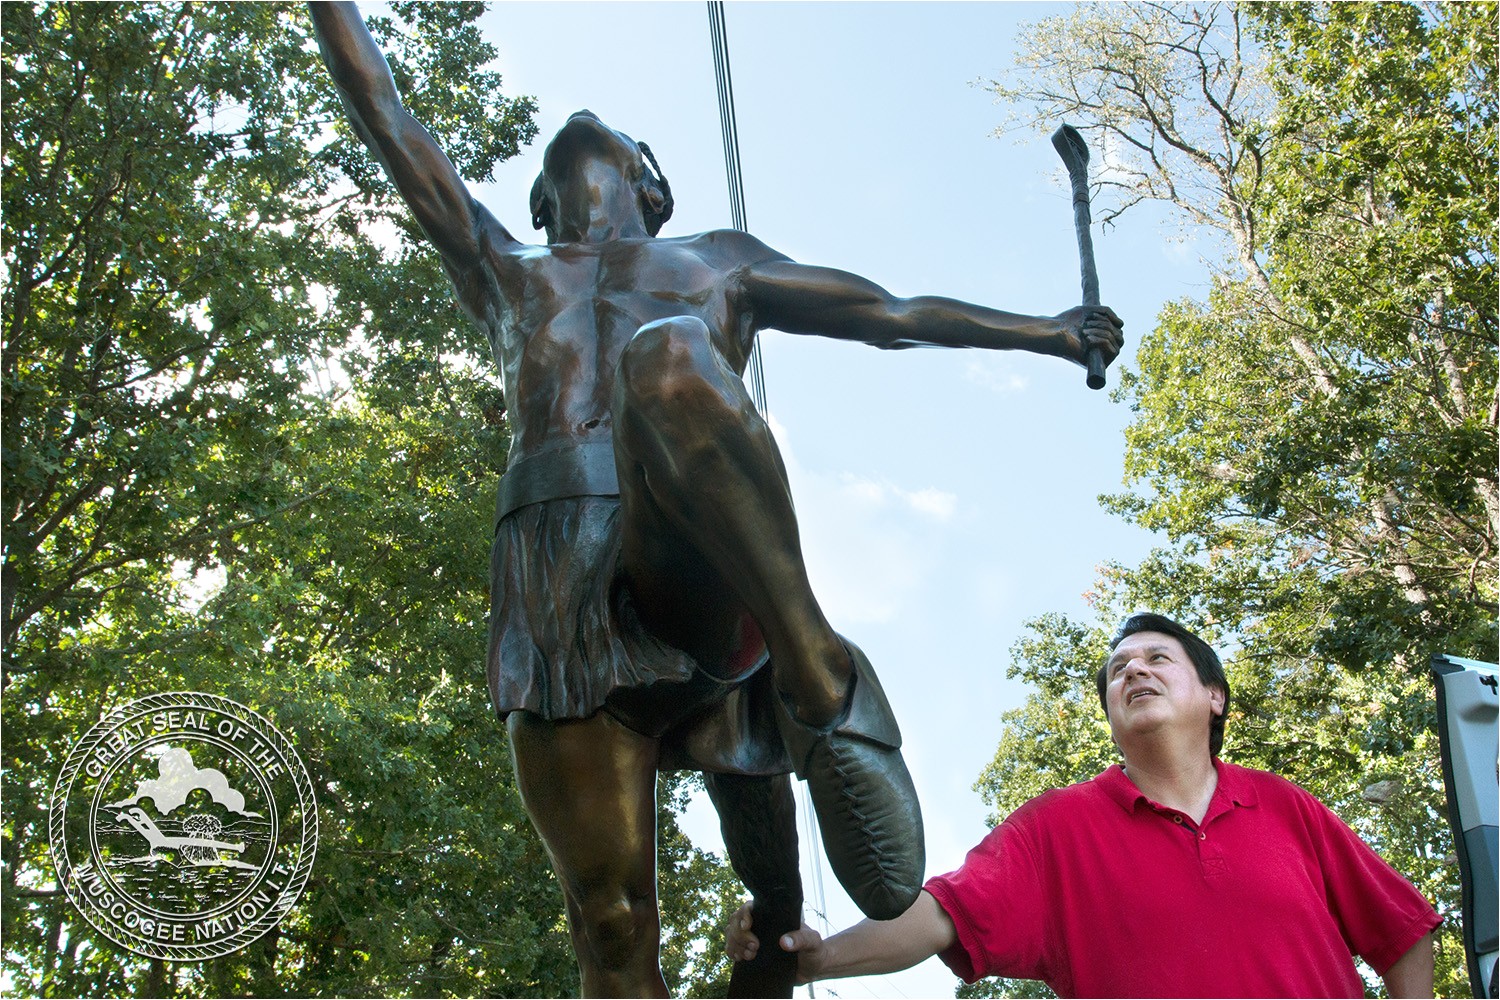 muscogee creek nation native american nations recognized with commemorative statue